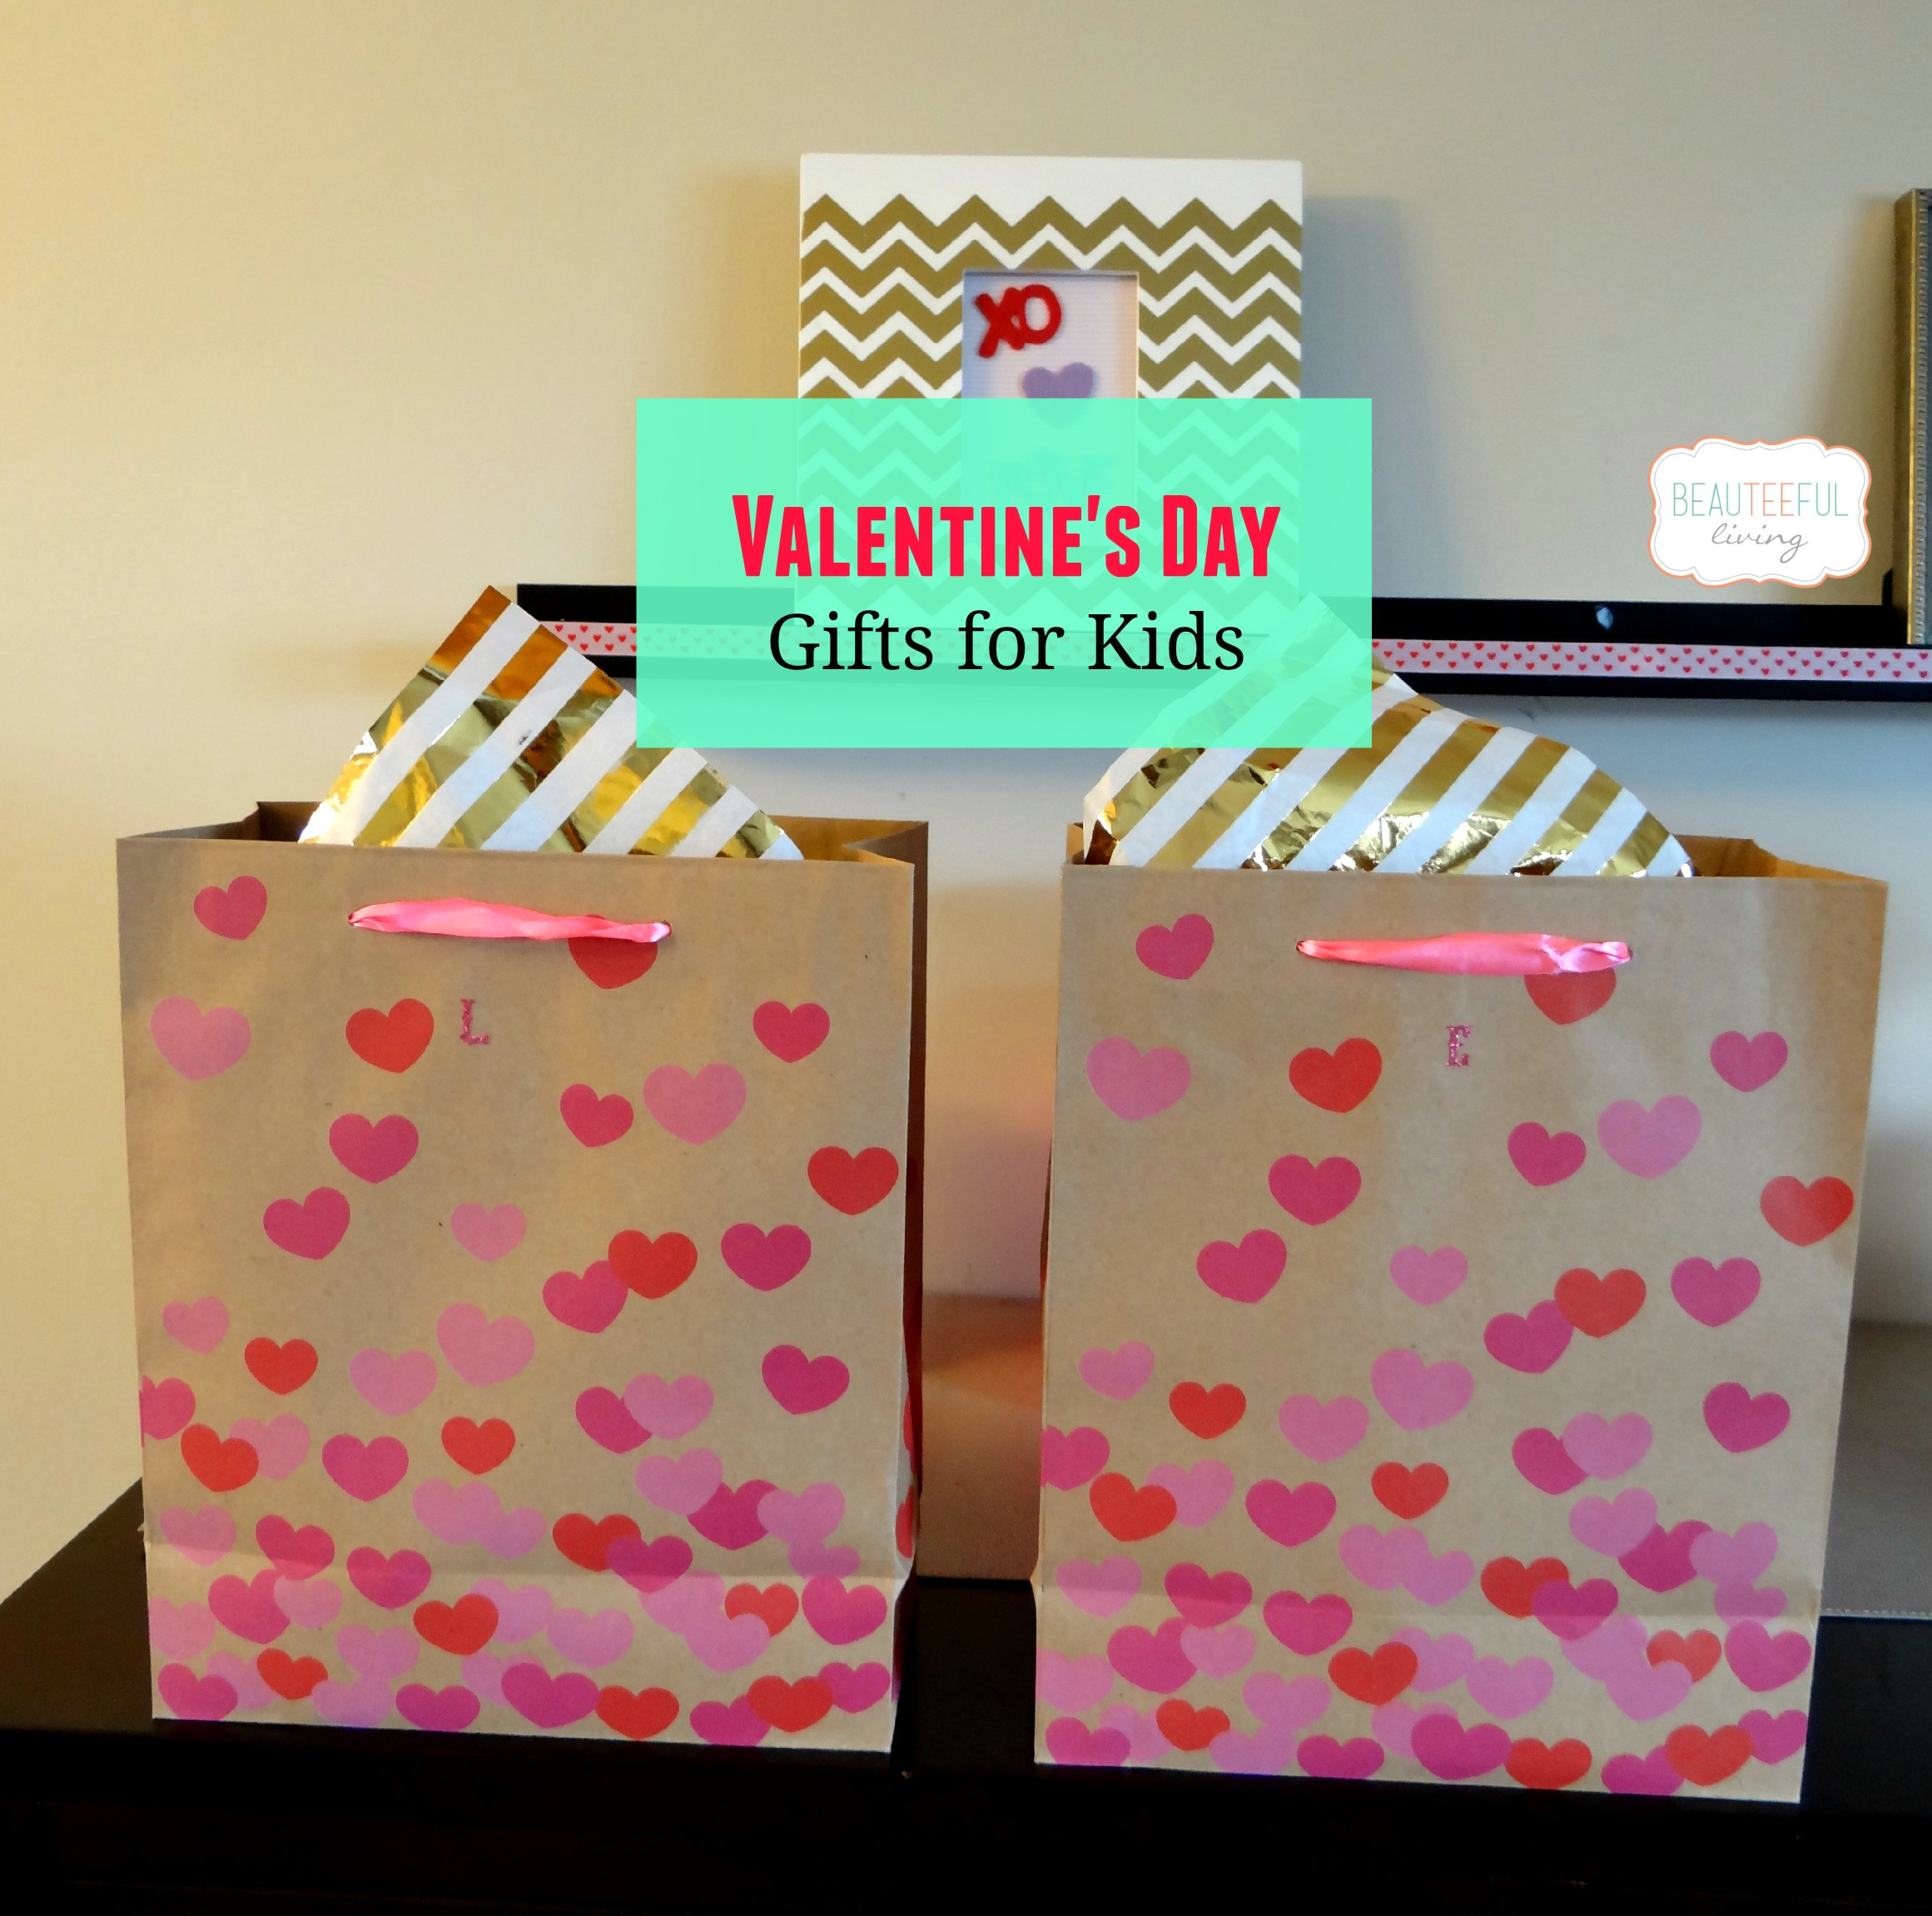 Gift Ideas For Kids For Valentines Day
 Valentine s Day Gifts for Kids BEAUTEEFUL Living